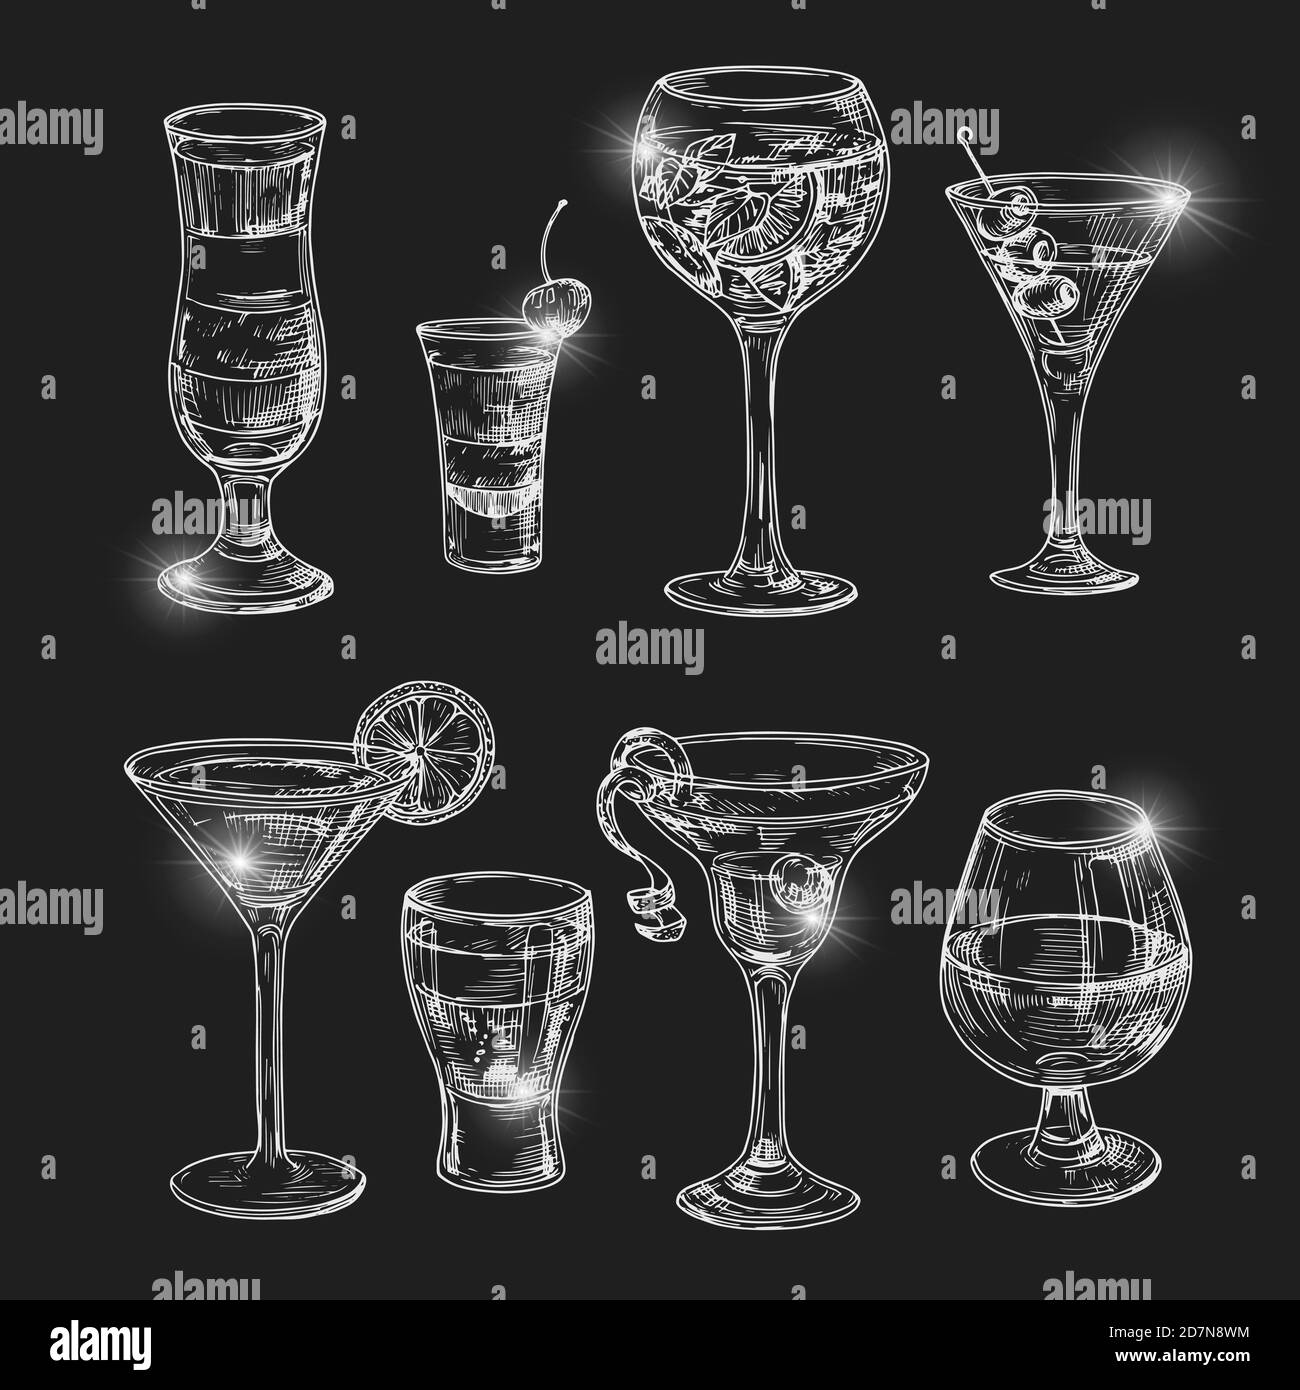 Hand dranw alcoholic cocktail with lights vector illustration. Alcohol cocktail glass, bar drink, beverage sketch Stock Vector